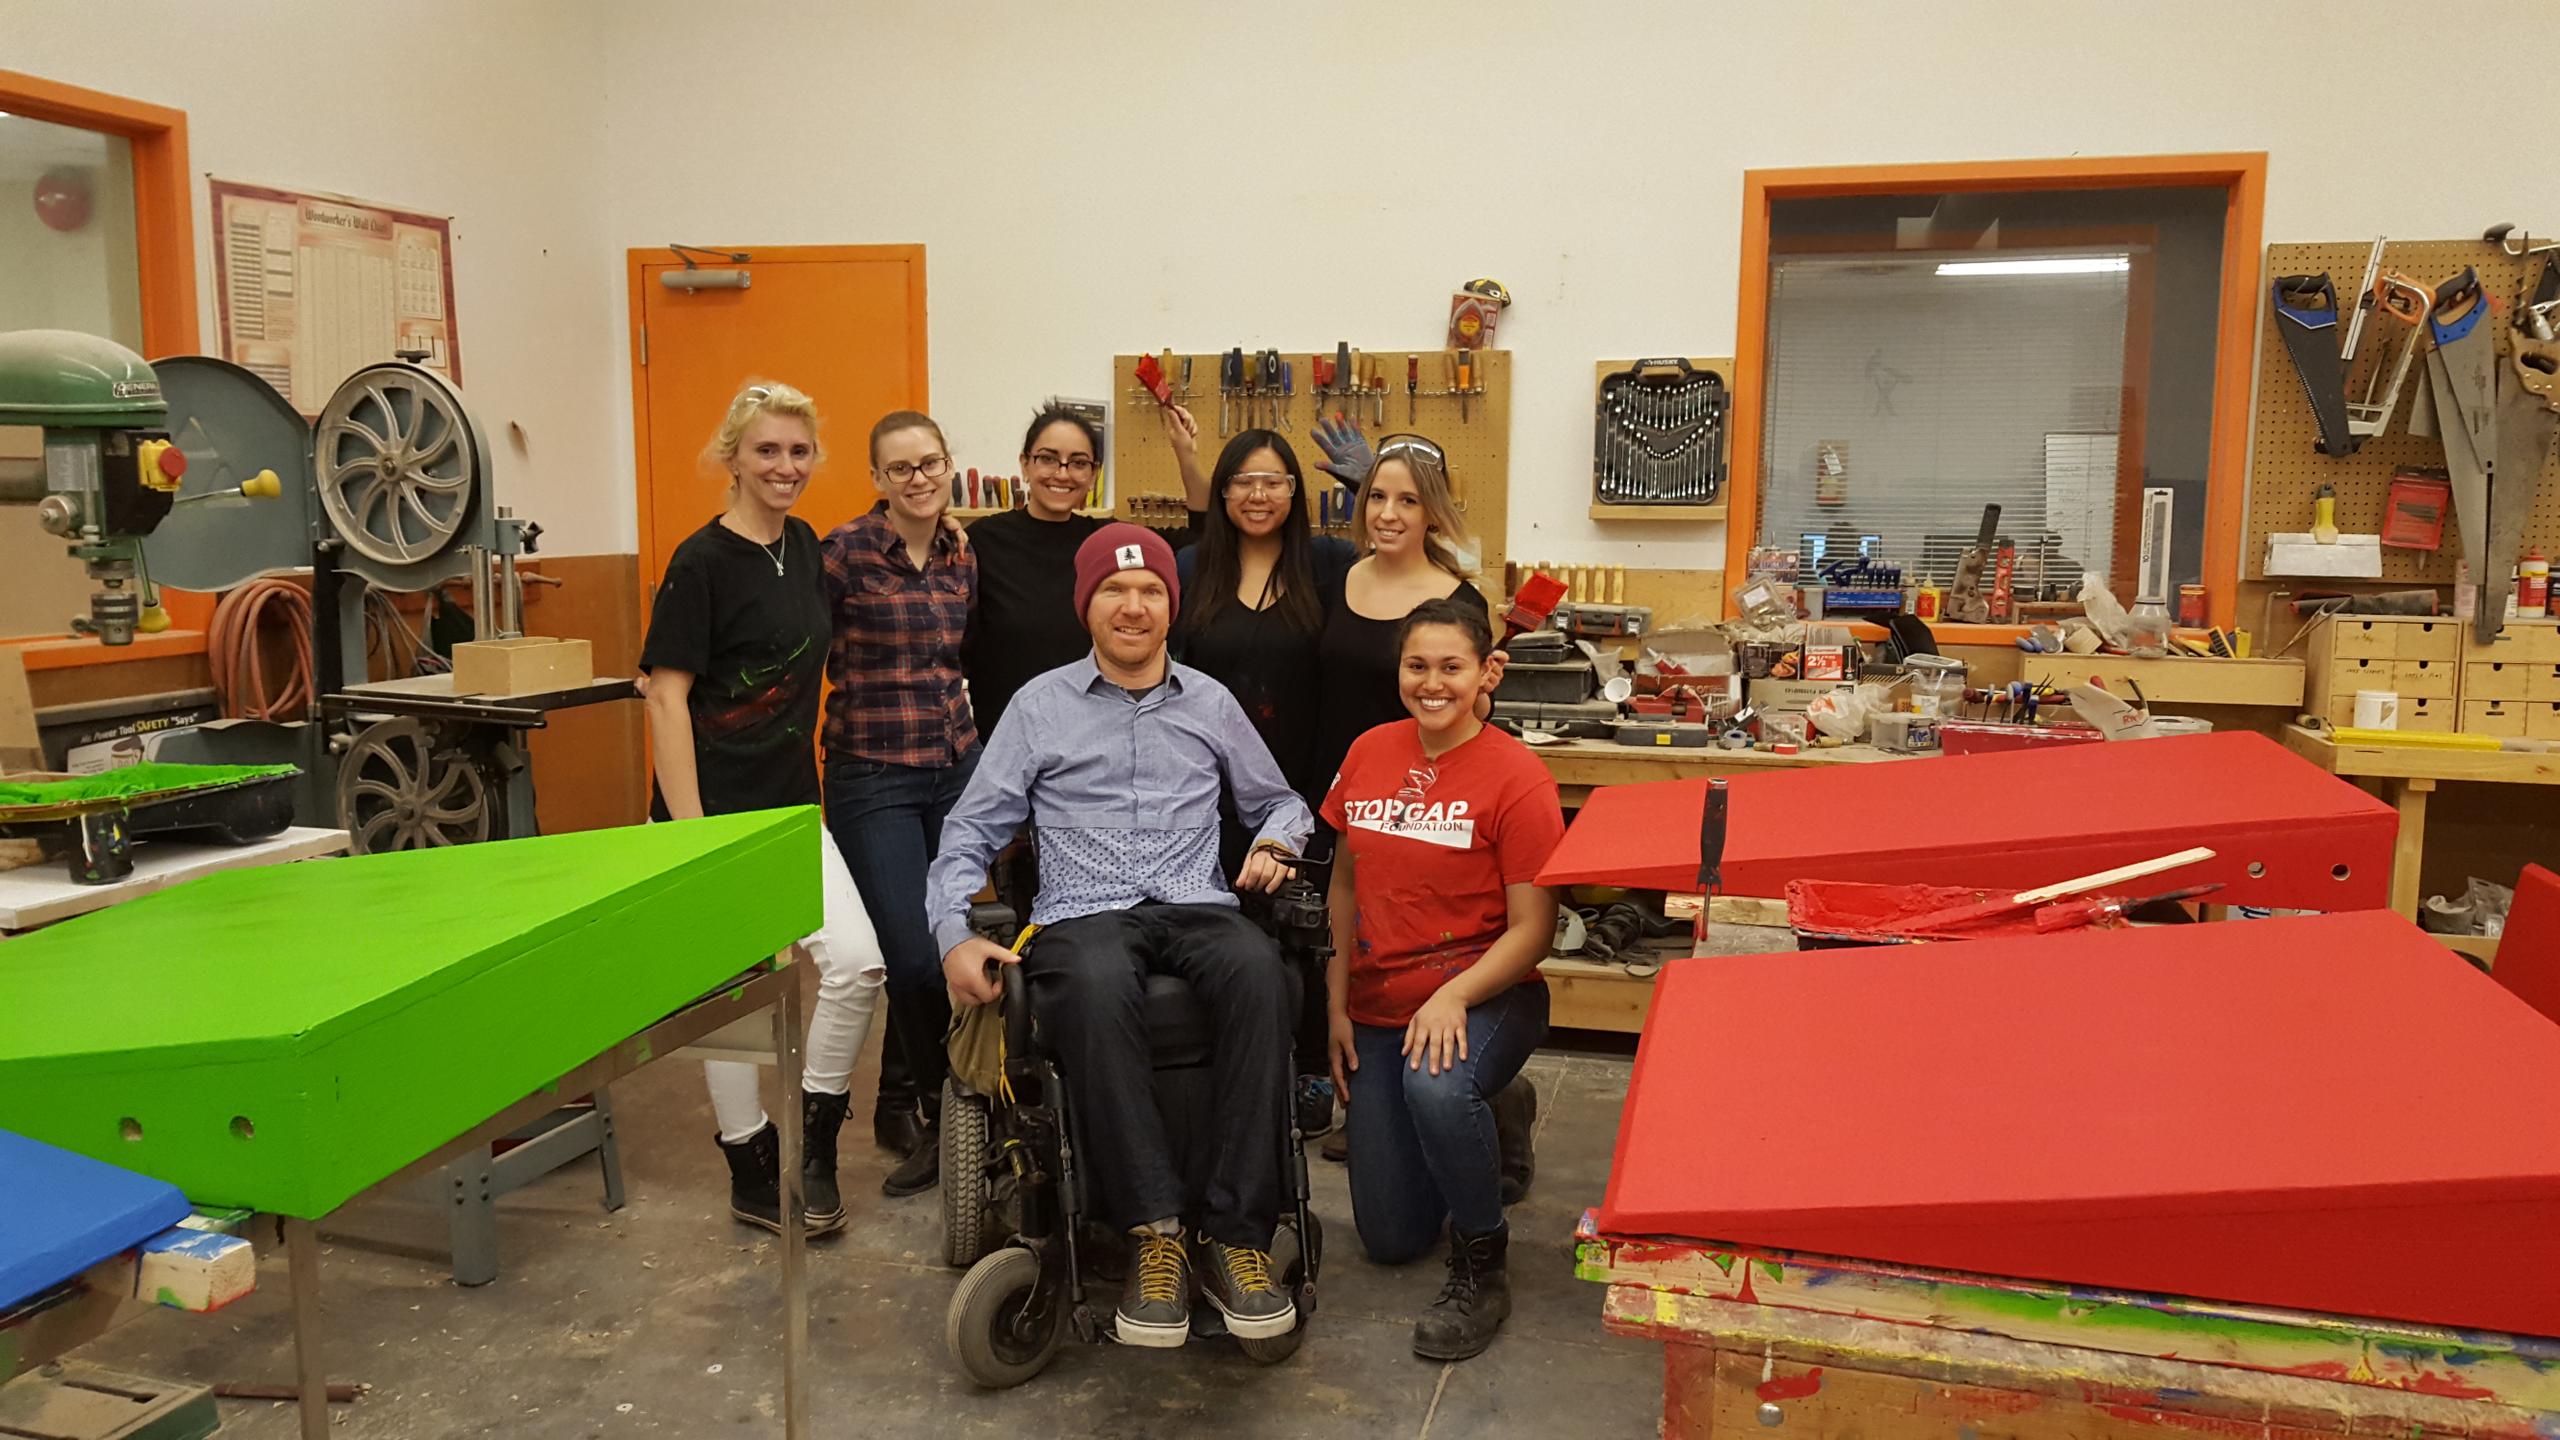 6 women pose with StopGap founder, Luke Anderson, surrounded by freshly painted ramps